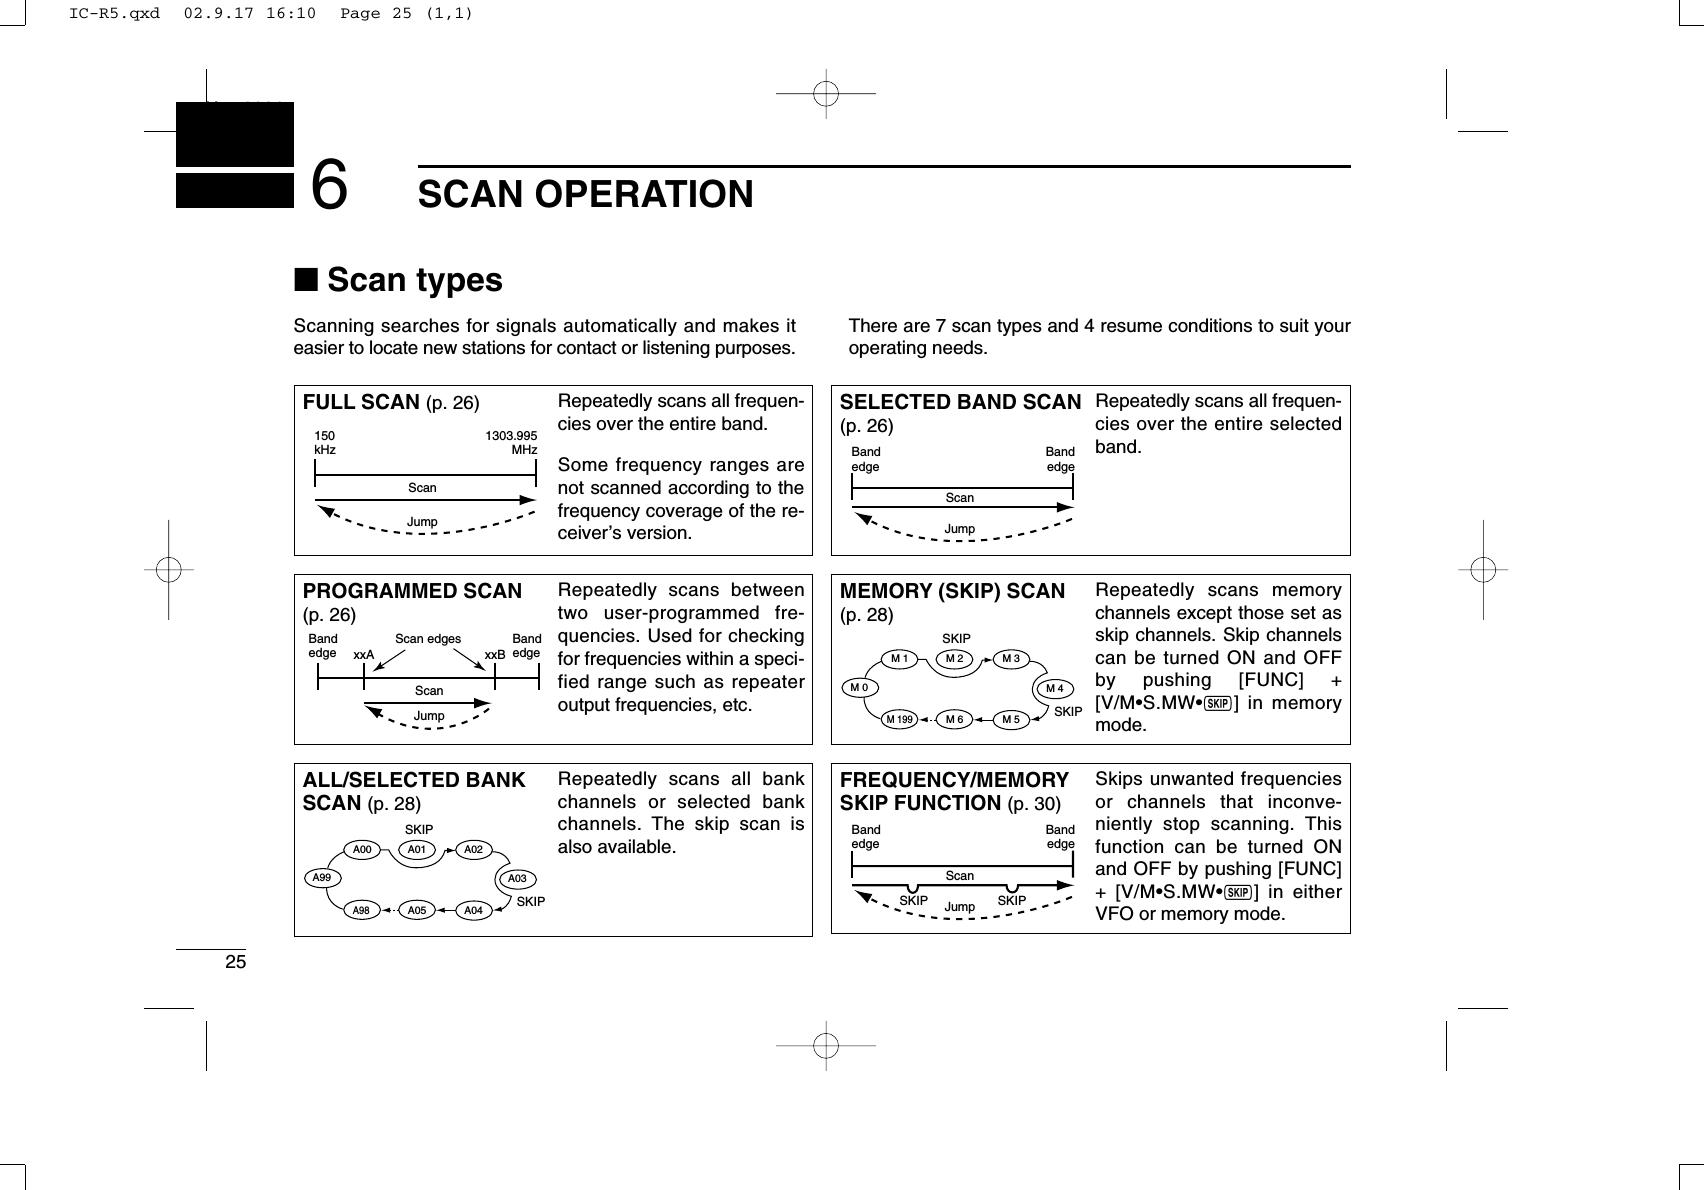 25SCAN OPERATIONNew20016■Scan typesScanning searches for signals automatically and makes iteasier to locate new stations for contact or listening purposes.There are 7 scan types and 4 resume conditions to suit youroperating needs.FULL SCAN (p. 26) Repeatedly scans all frequen-cies over the entire band. Some frequency ranges arenot scanned according to thefrequency coverage of the re-ceiver’s version.150kHz1303.995MHzScanJumpSELECTED BAND SCAN(p. 26)Repeatedly scans all frequen-cies over the entire selectedband. BandedgeBandedgeScanJumpALL/SELECTED BANKSCAN (p. 28)Repeatedly scans all bankchannels or selected bankchannels. The skip scan isalso available.SKIPSKIPA99 A03A00 A01 A02A04A98A05FREQUENCY/MEMORYSKIP FUNCTION (p. 30)Skips unwanted frequenciesor channels that inconve-niently stop scanning. Thisfunction can be turned ONand OFF by pushing [FUNC]+ [V/M•S.MW•~] in eitherVFO or memory mode.BandedgeBandedgeScanSKIP SKIPJumpPROGRAMMED SCAN(p. 26)Repeatedly scans betweentwo user-programmed fre-quencies. Used for checkingfor frequencies within a speci-fied range such as repeateroutput frequencies, etc.Bandedge xxA xxBBandedgeScan edgesScanJumpMEMORY (SKIP) SCAN(p. 28)Repeatedly scans memorychannels except those set asskip channels. Skip channelscan be turned ON and OFFby pushing [FUNC] +[V/M•S.MW•~] in memorymode.SKIPSKIPM 0 M 4M 1 M 2 M 3M 5M 199M 6IC-R5.qxd  02.9.17 16:10  Page 25 (1,1)